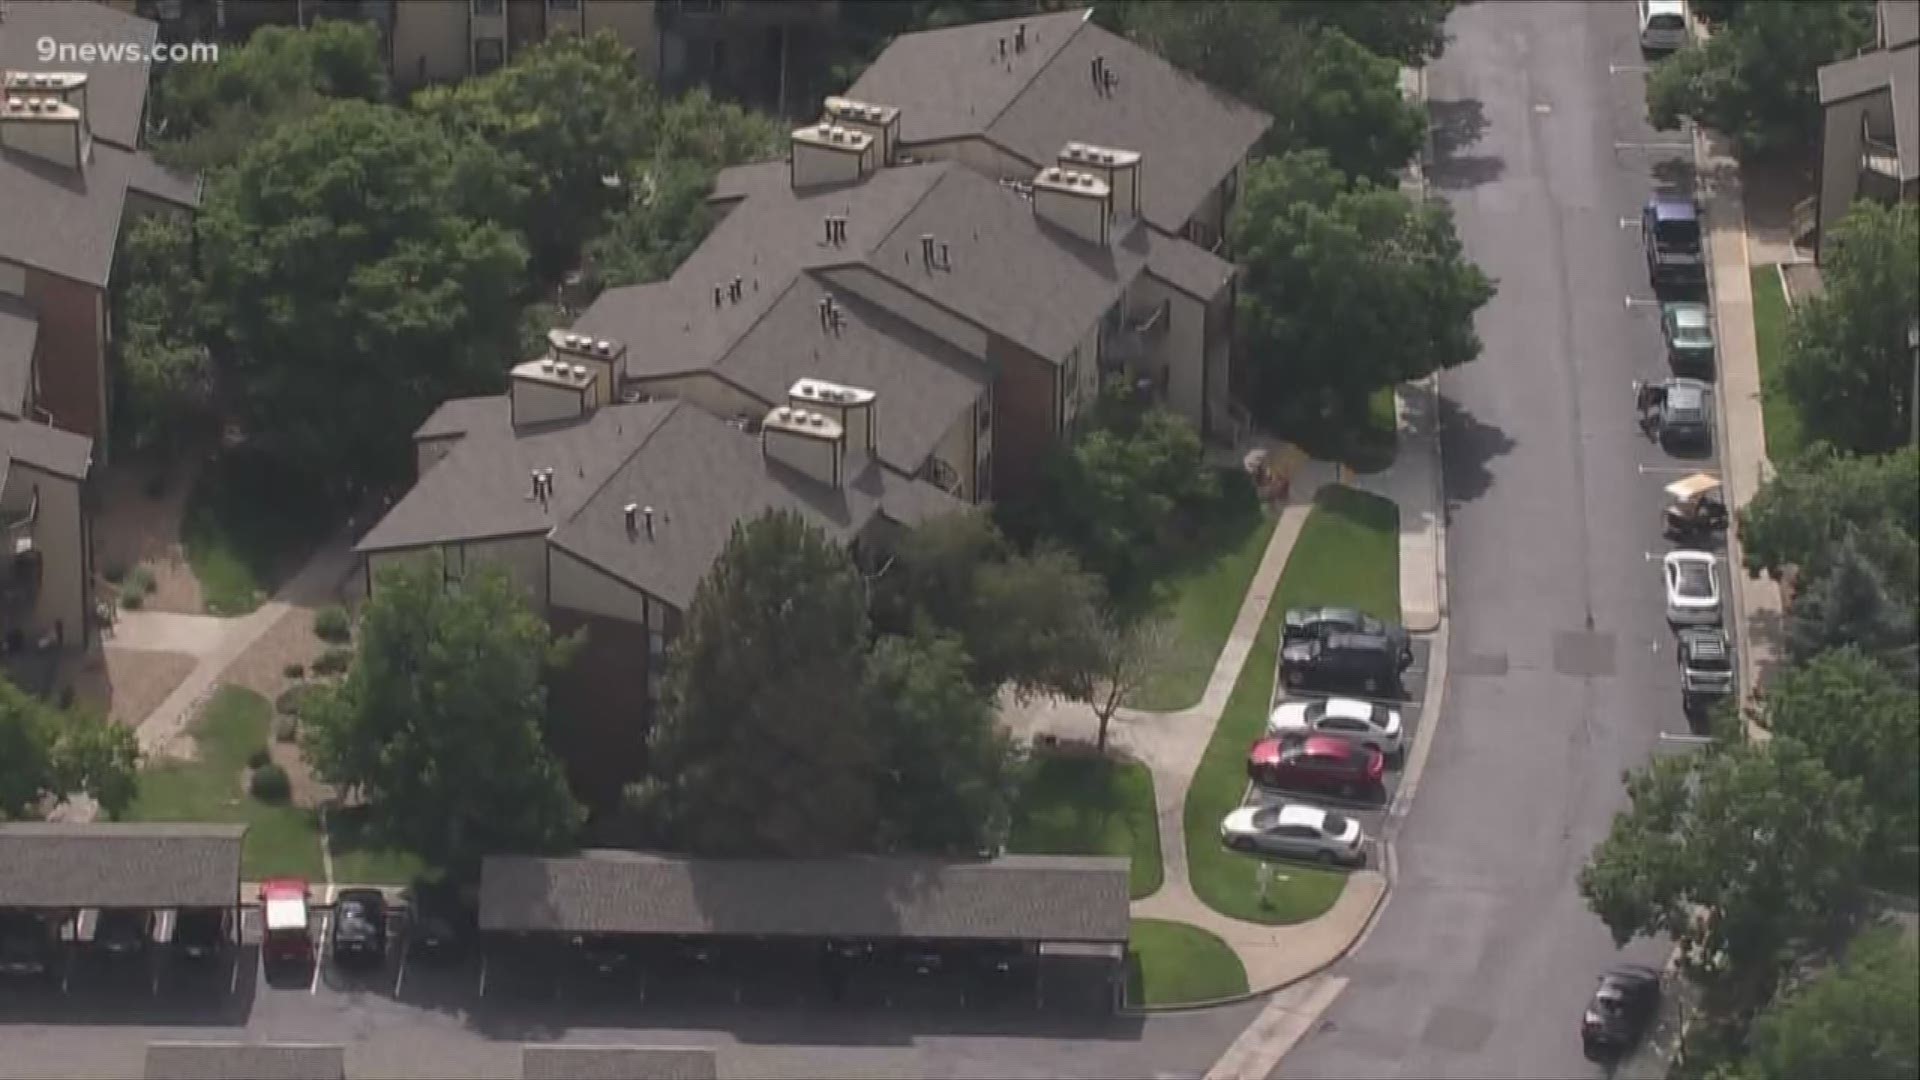 A 26-year-old DOC officer is in custody after a shooting at the Greensview Apartment Complex.